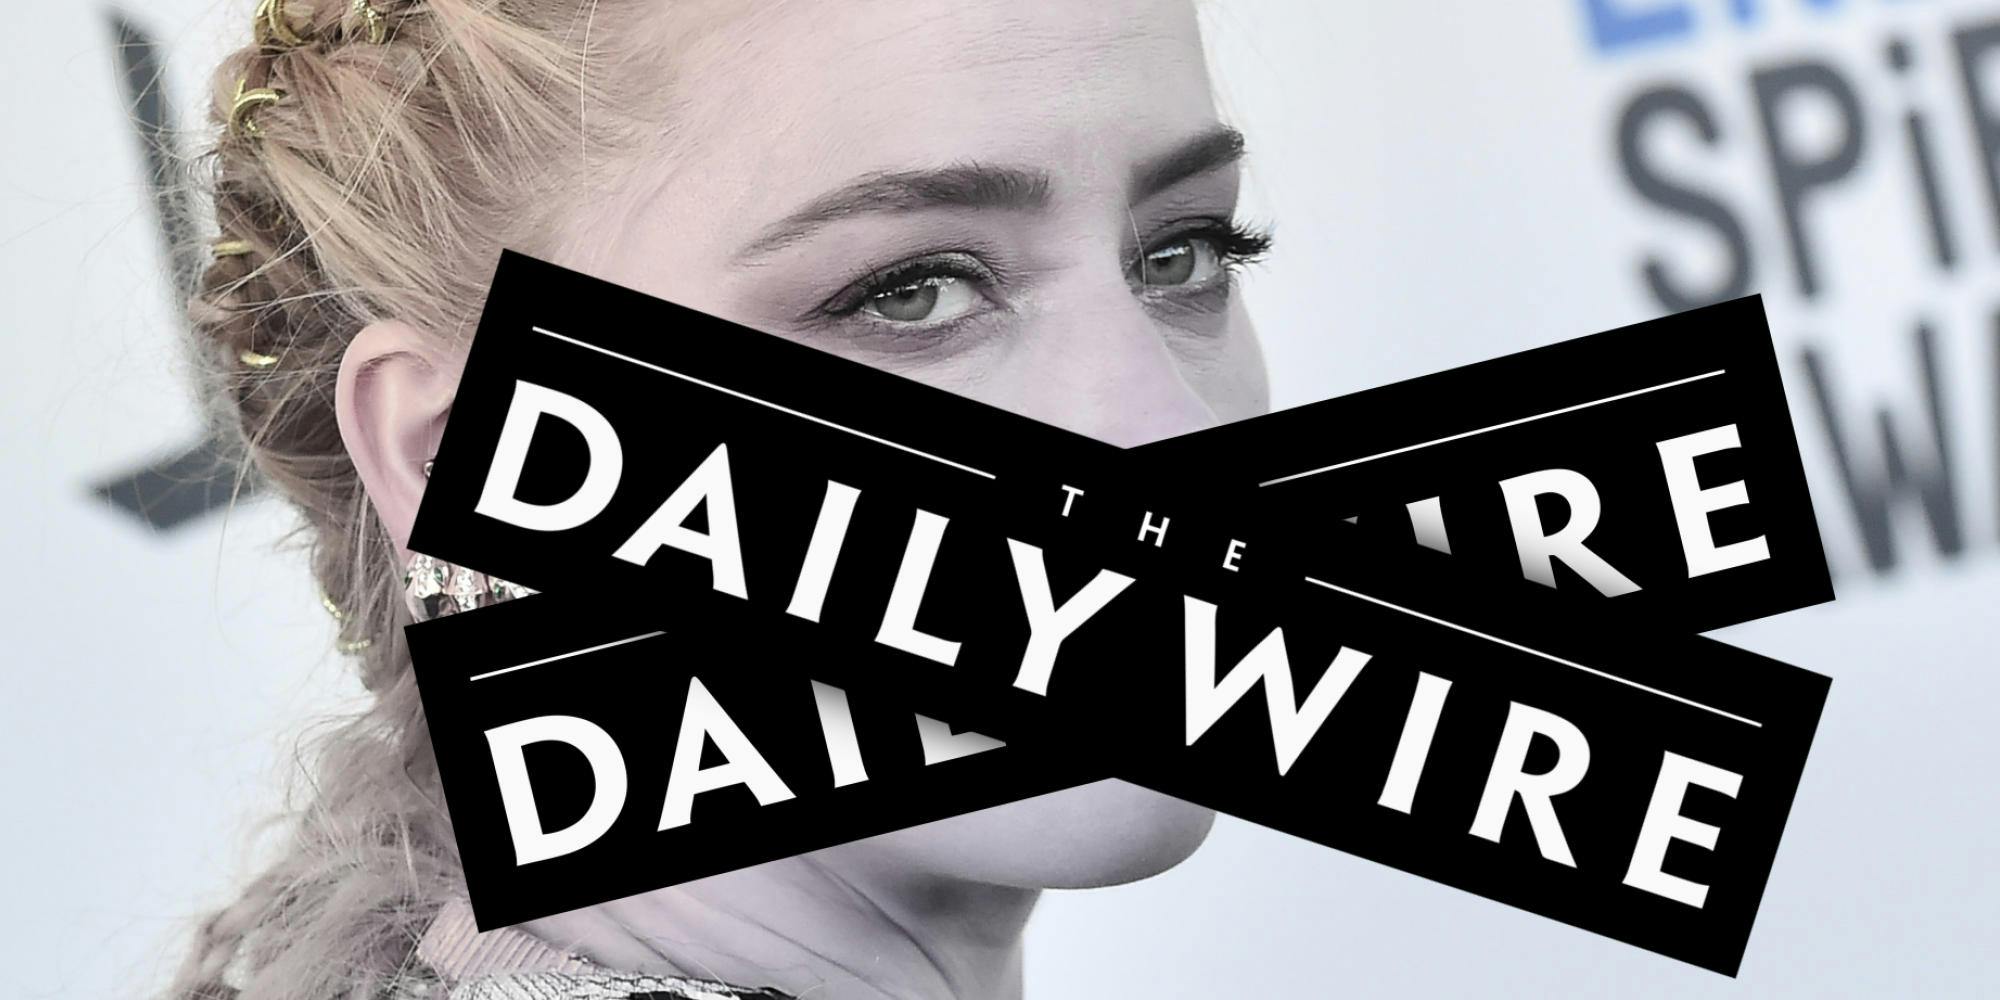 blonde woman but her mouth is being blocked by "The Daily Wire" logos